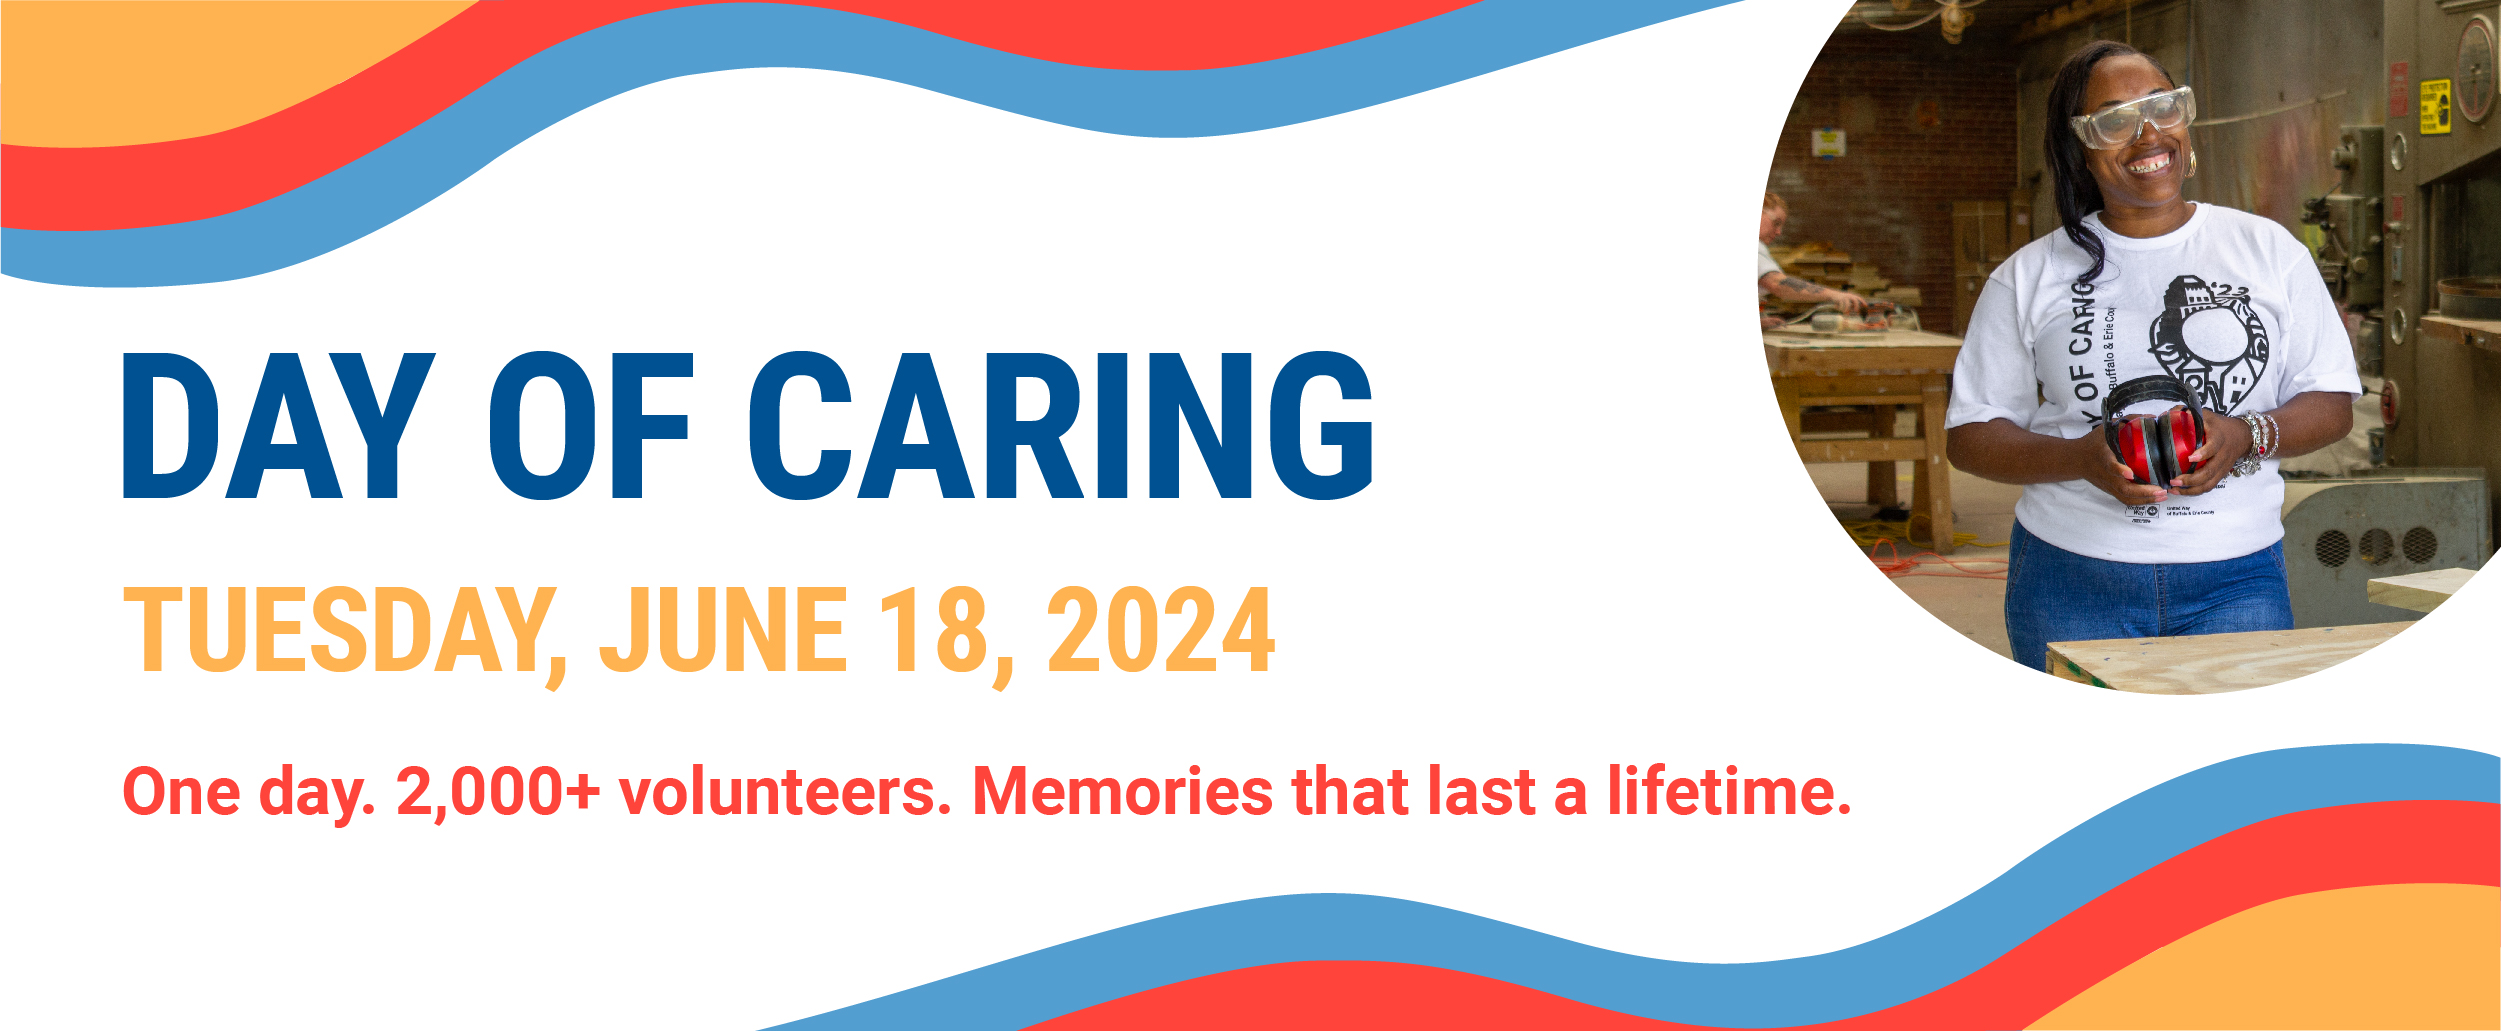 Day Of Caring Nonprofit Registration 2023 Image